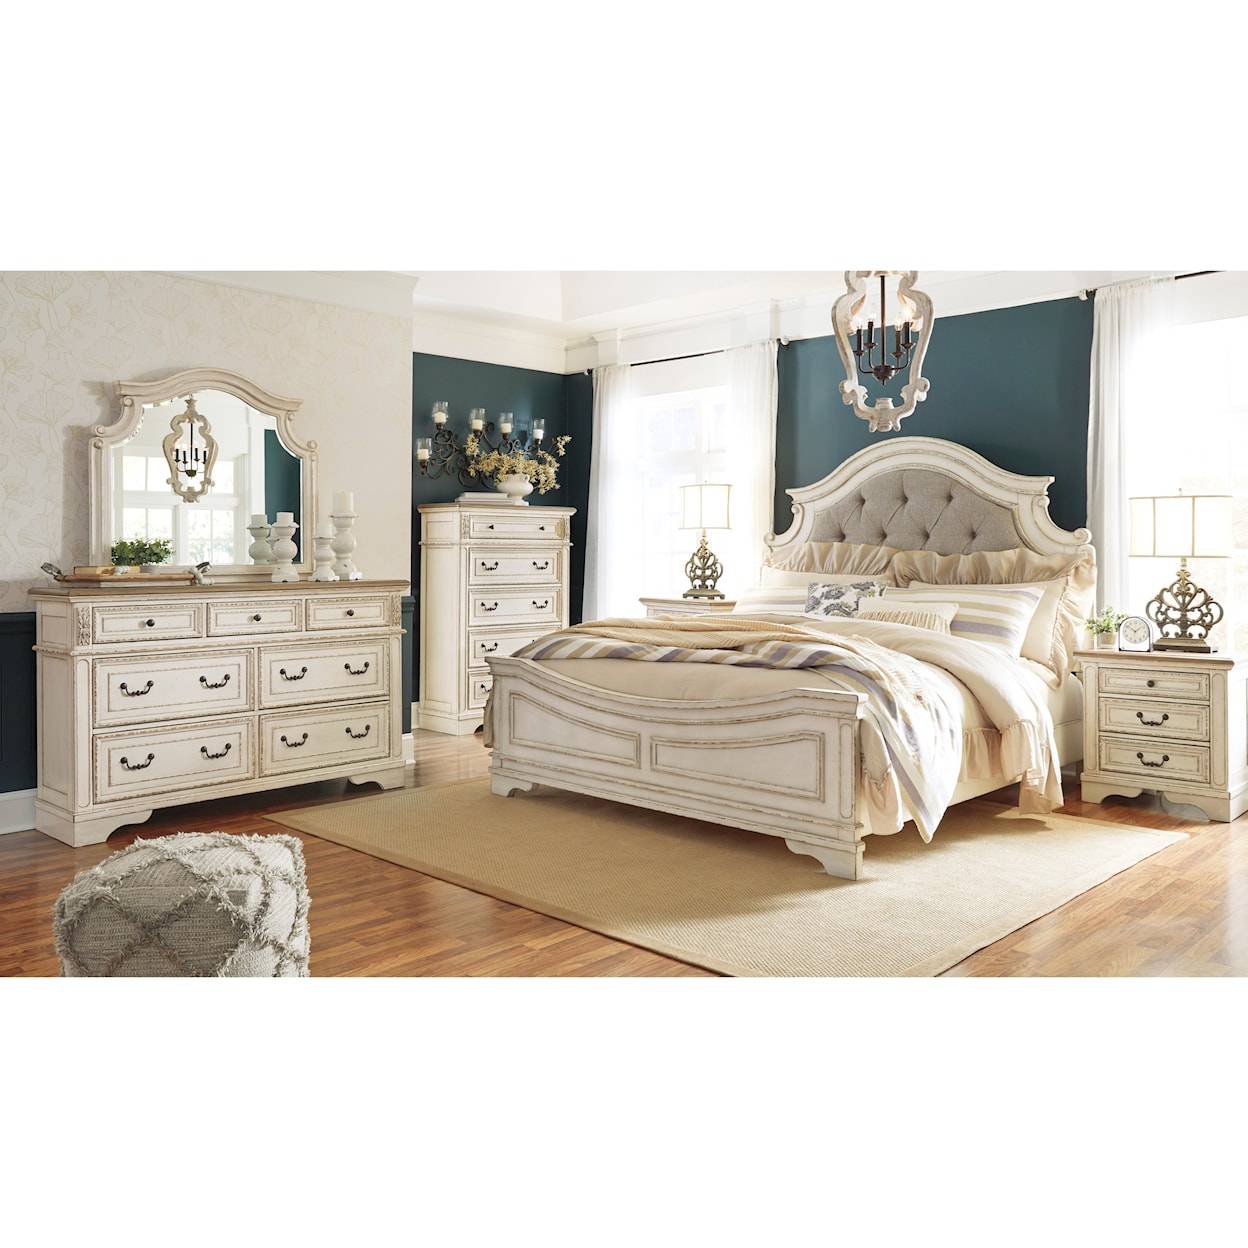 Signature Design by Ashley Realyn Queen Bedroom Group